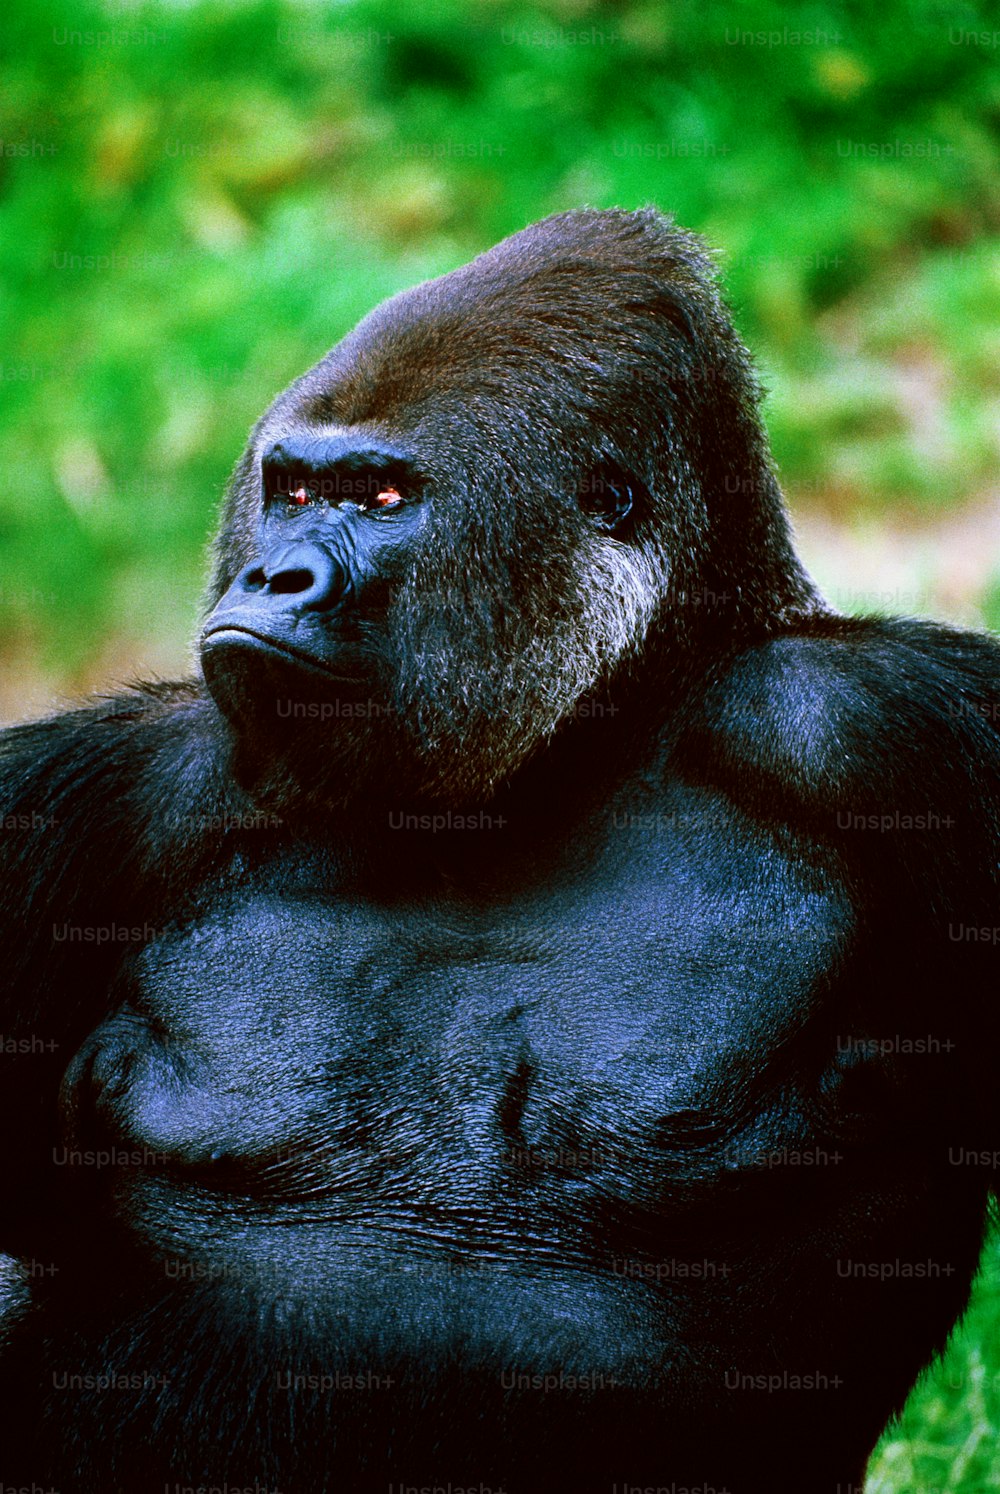 Endangered species. Native to Central African Republic, Cameroon, Gabon, Congo, Equatorial Guinea. Largest anthropoid ape. 3 species separated geographically. The other two: eastern lowland and mountain gorilla. This gorilla is captive.